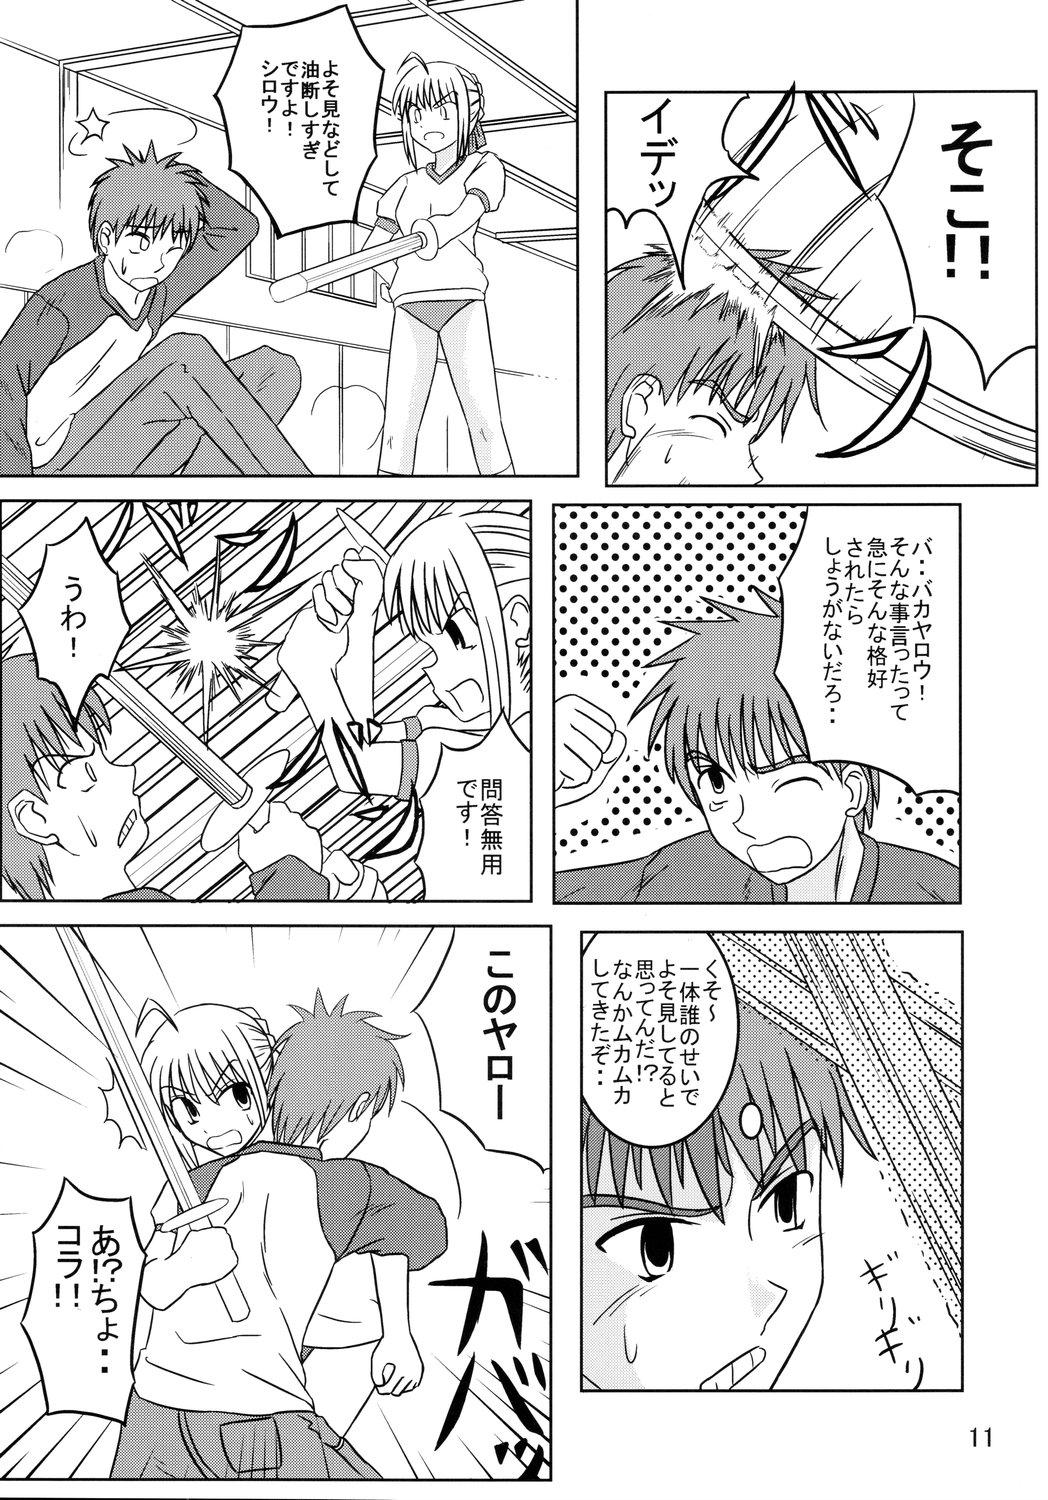 Bisex Saber Of Sanity - Fate stay night Handsome - Page 10